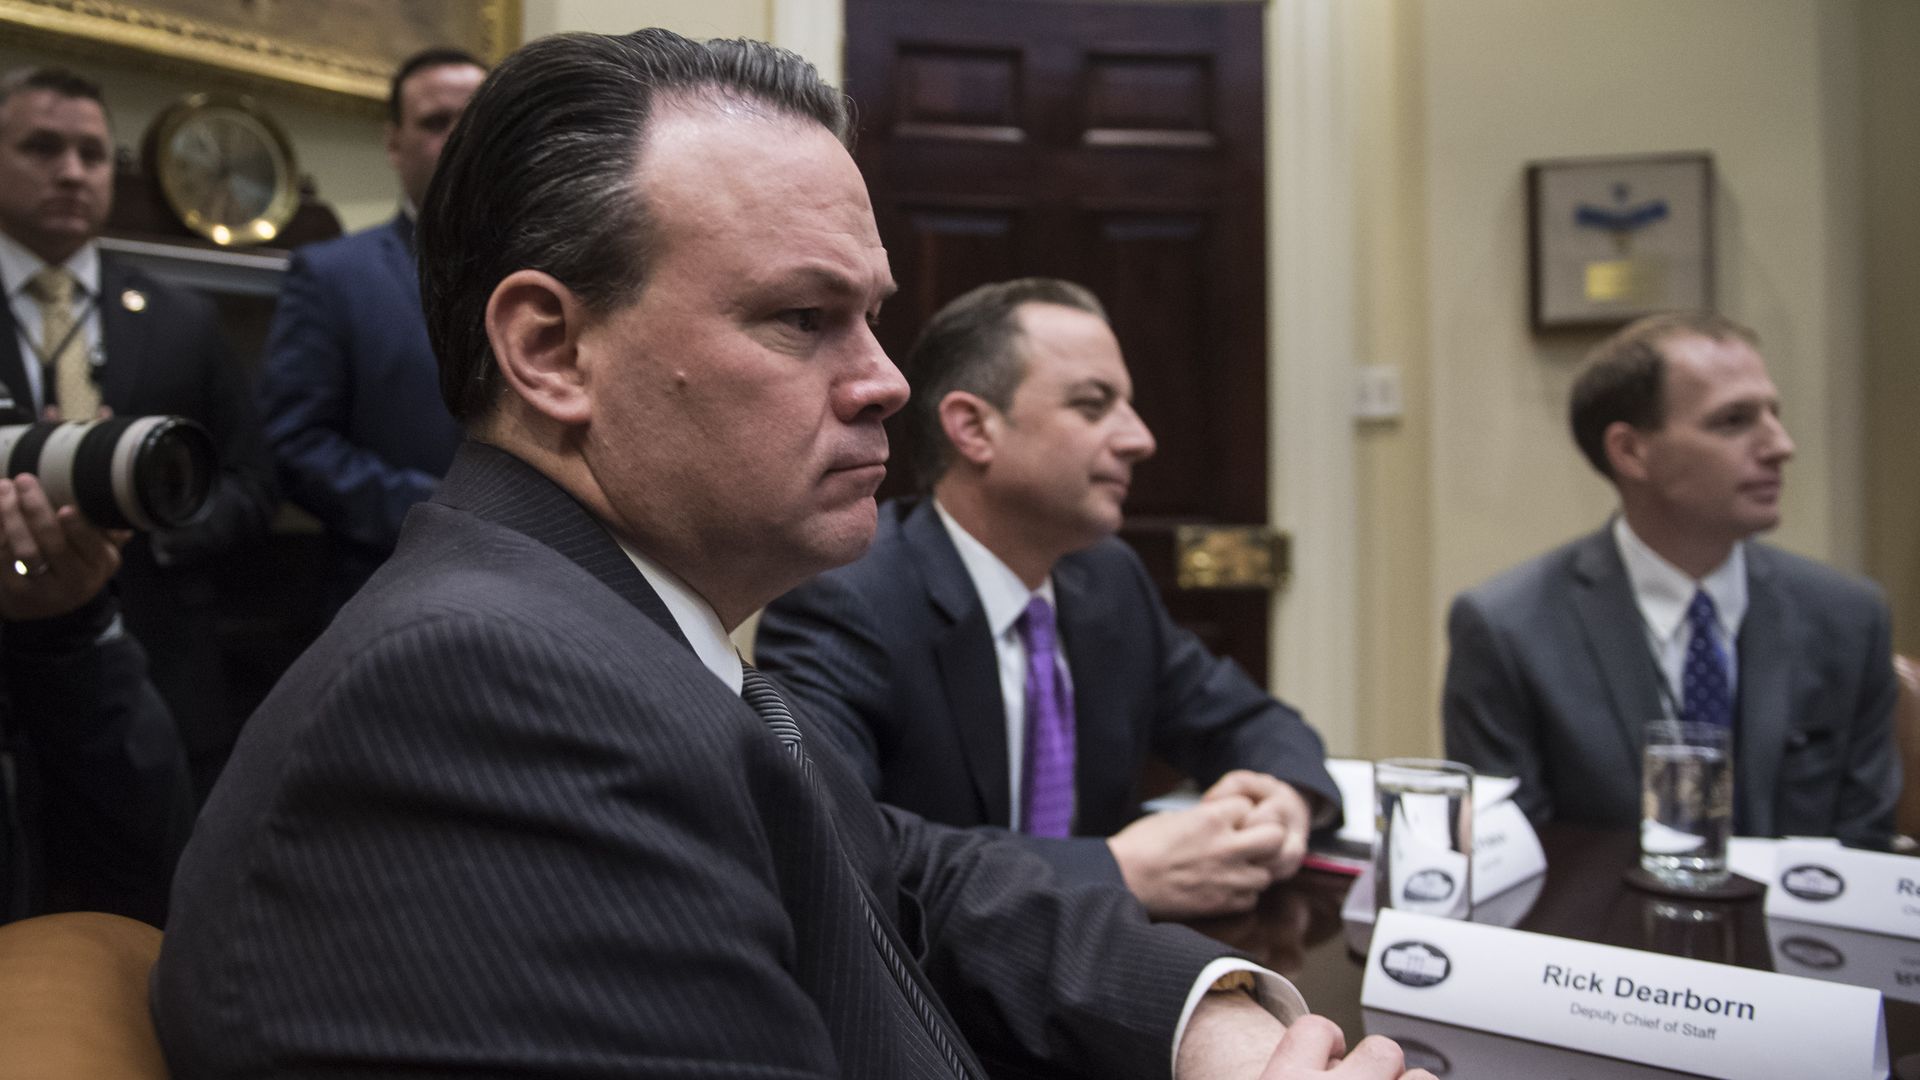 Rick Dearborn sits to the left of former chief of staff Reince Priebus